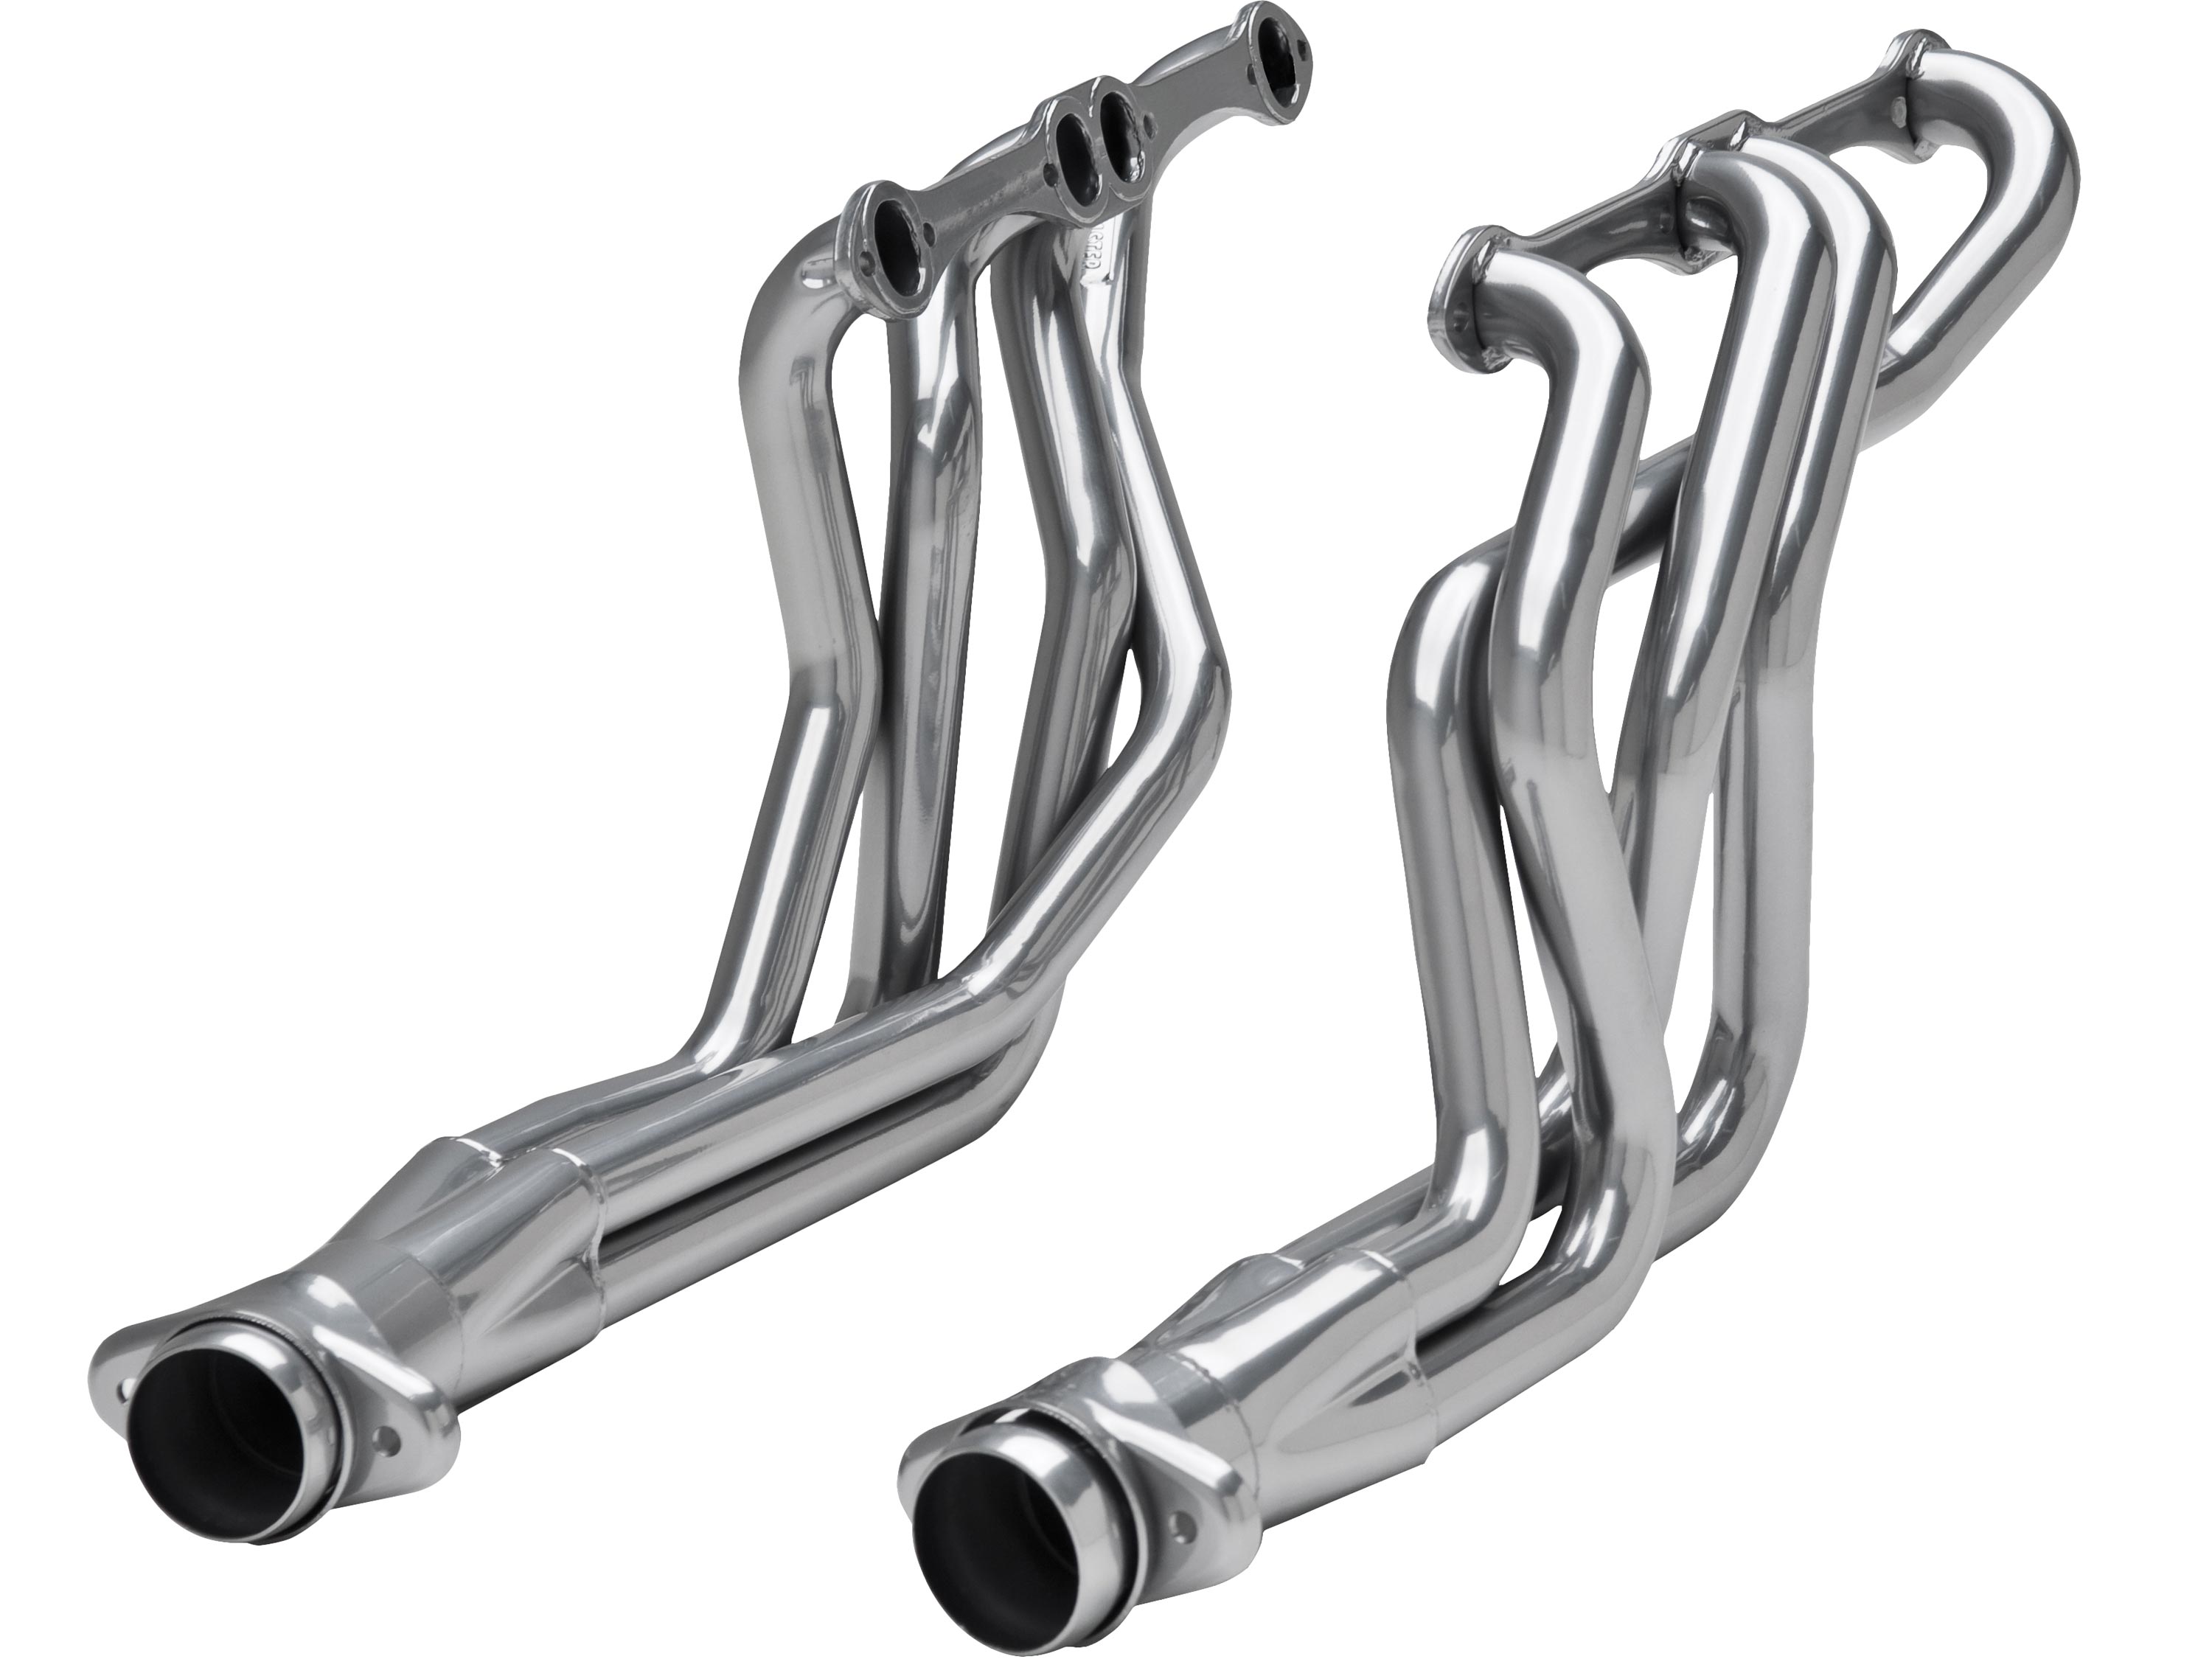 Flowmaster Adds Stainless Steel Headers To Complement Their Exhausts